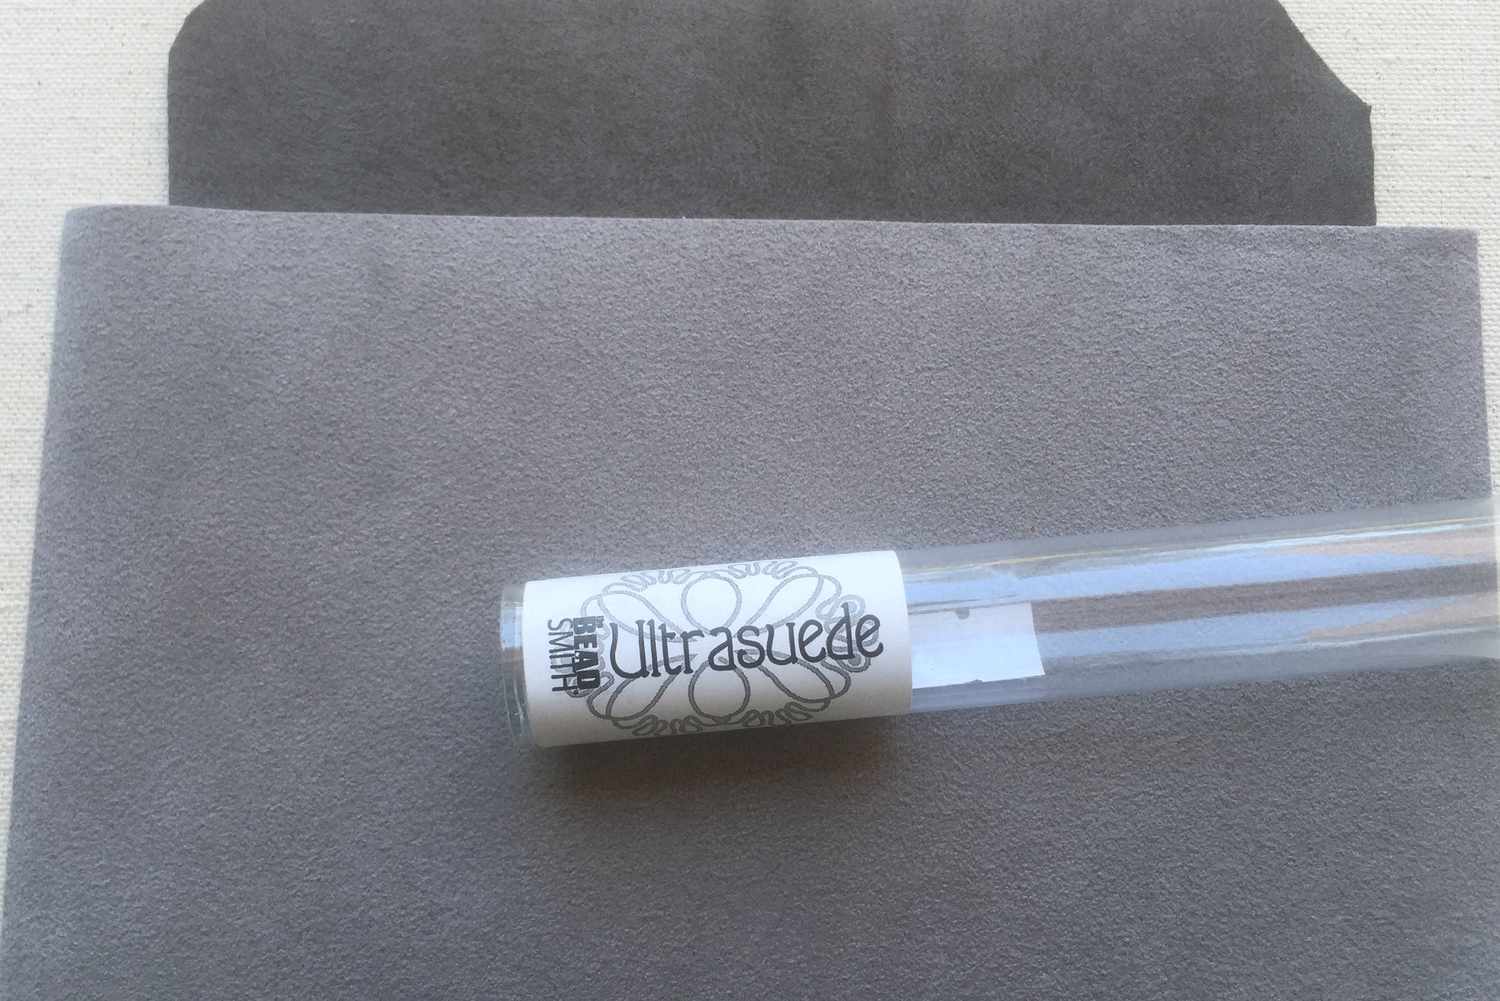 Ultrasuede bead embroidery foundation